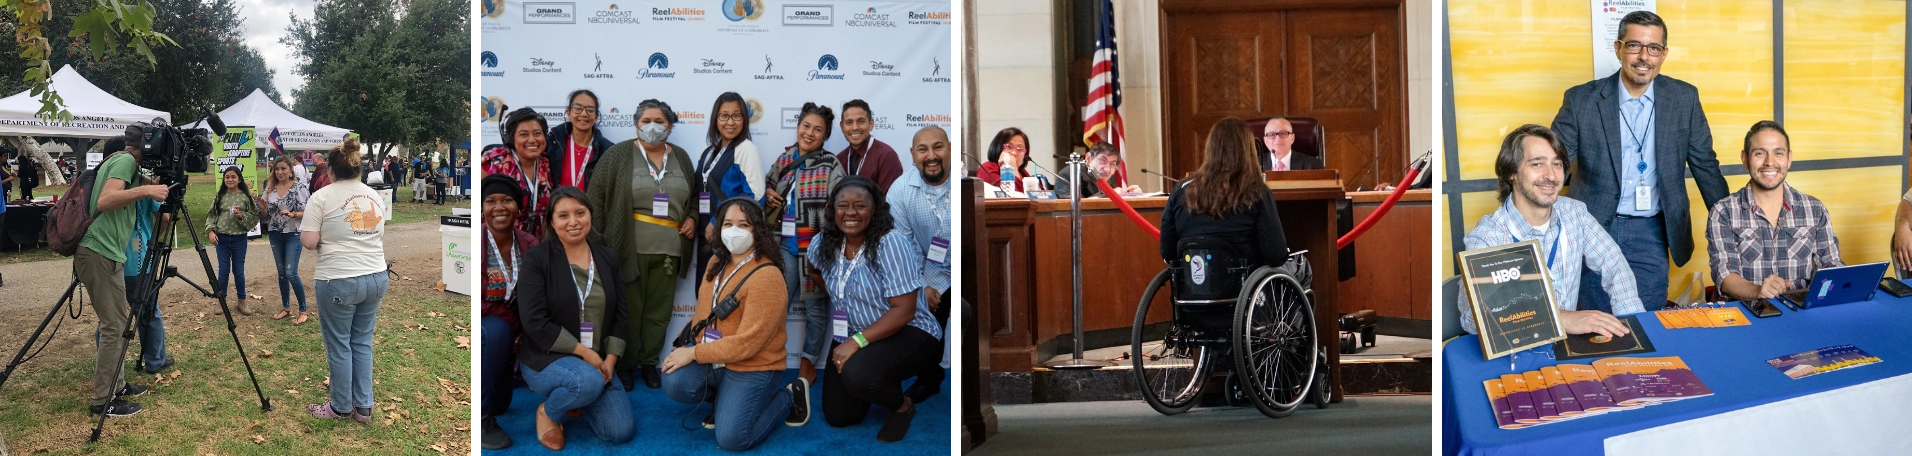 Four images group together, from left to right. First image: Two people getting interviewed on camera for a news segment at the 2022 Deaf latinos y familias event. Second photo: A group photo of Department on Disability staff and volunteers at the ReelAbilities Film Festival. Third image: A person using a wheelchair speaking in front of the LA City Commission on Disability. Fourth image: Department on Disability staff at an information table.